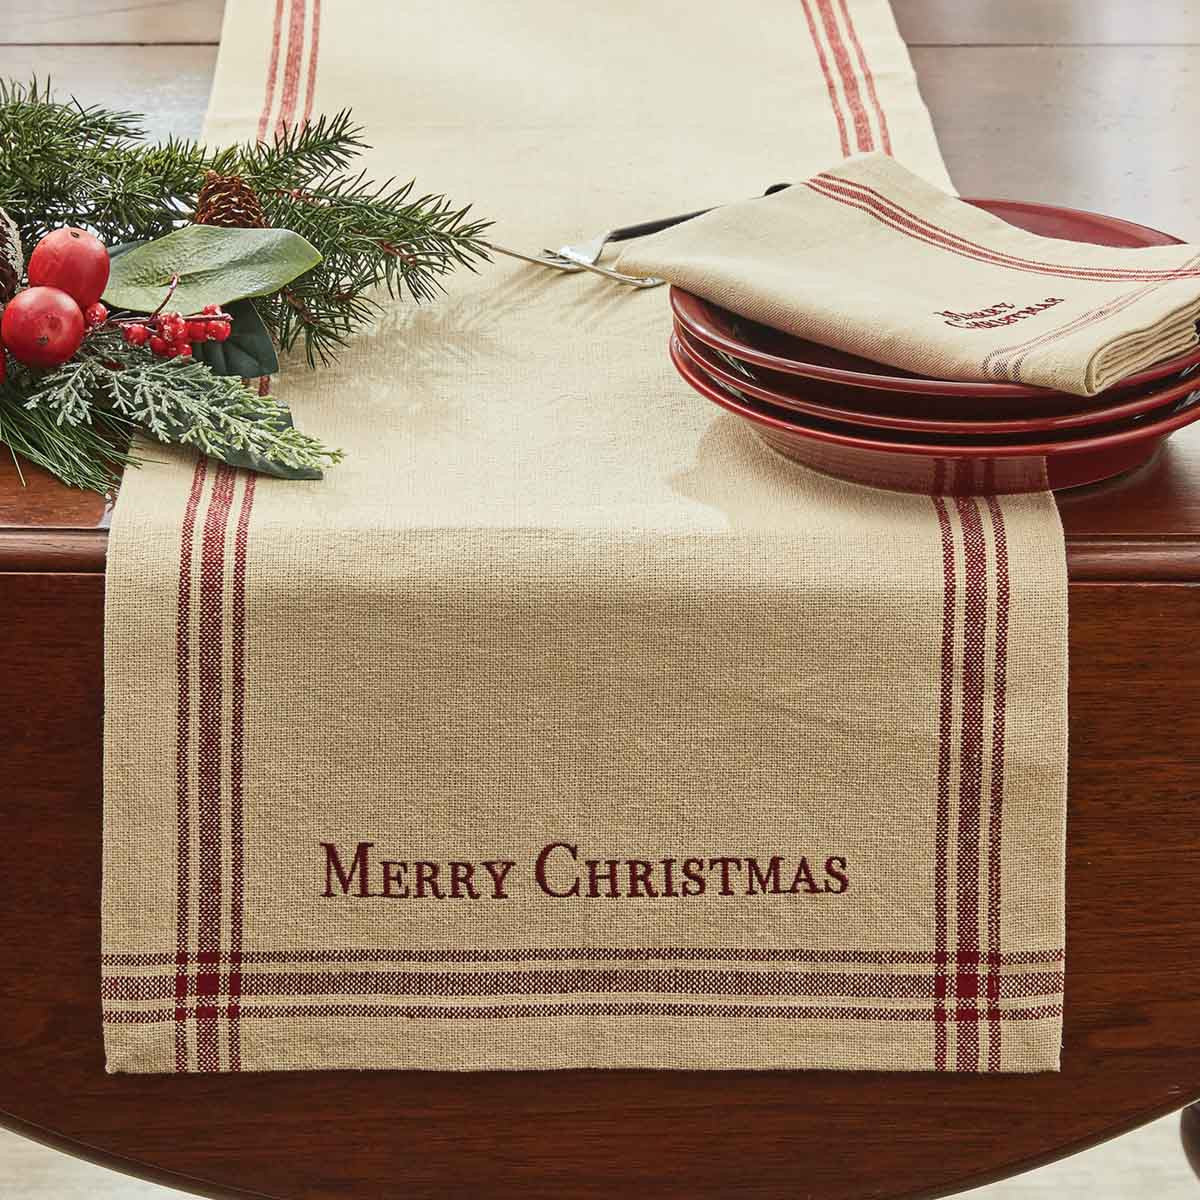 Christmas Greeting Embroidered Table Runner - 36"L Park Designs